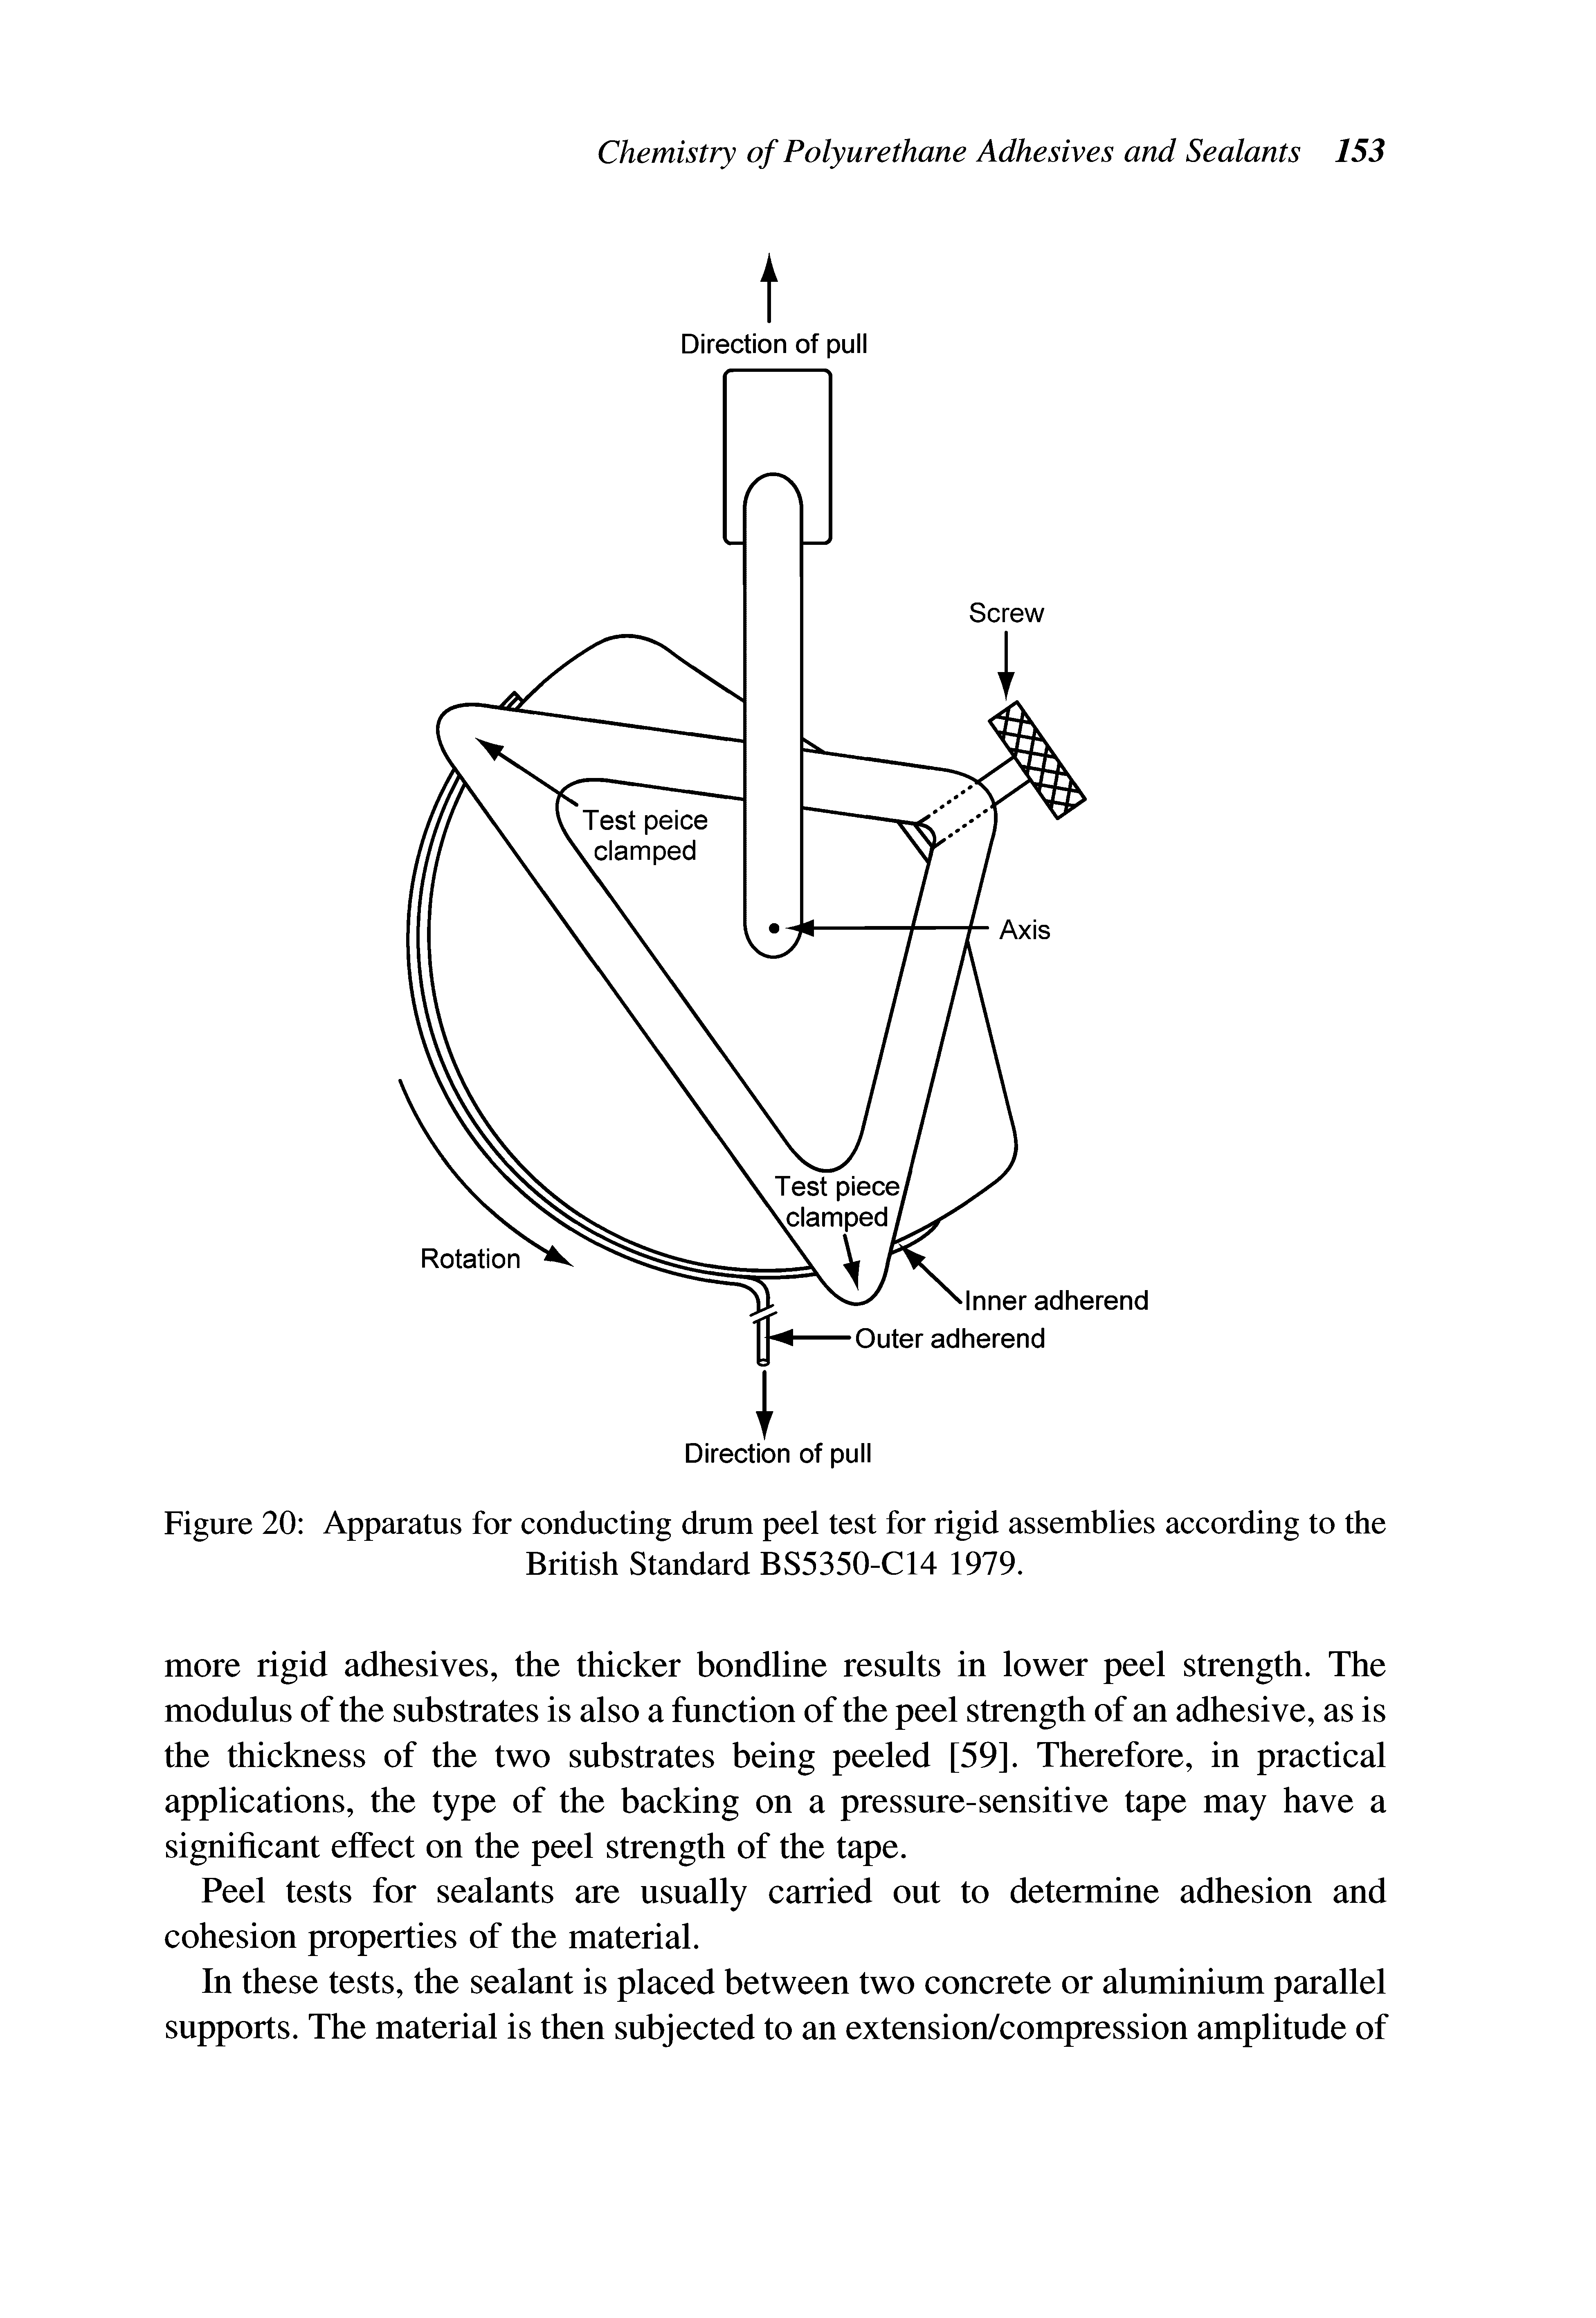 Figure 20 Apparatus for conducting drum peel test for rigid assemblies according to the British Standard BS5350-C14 1979.